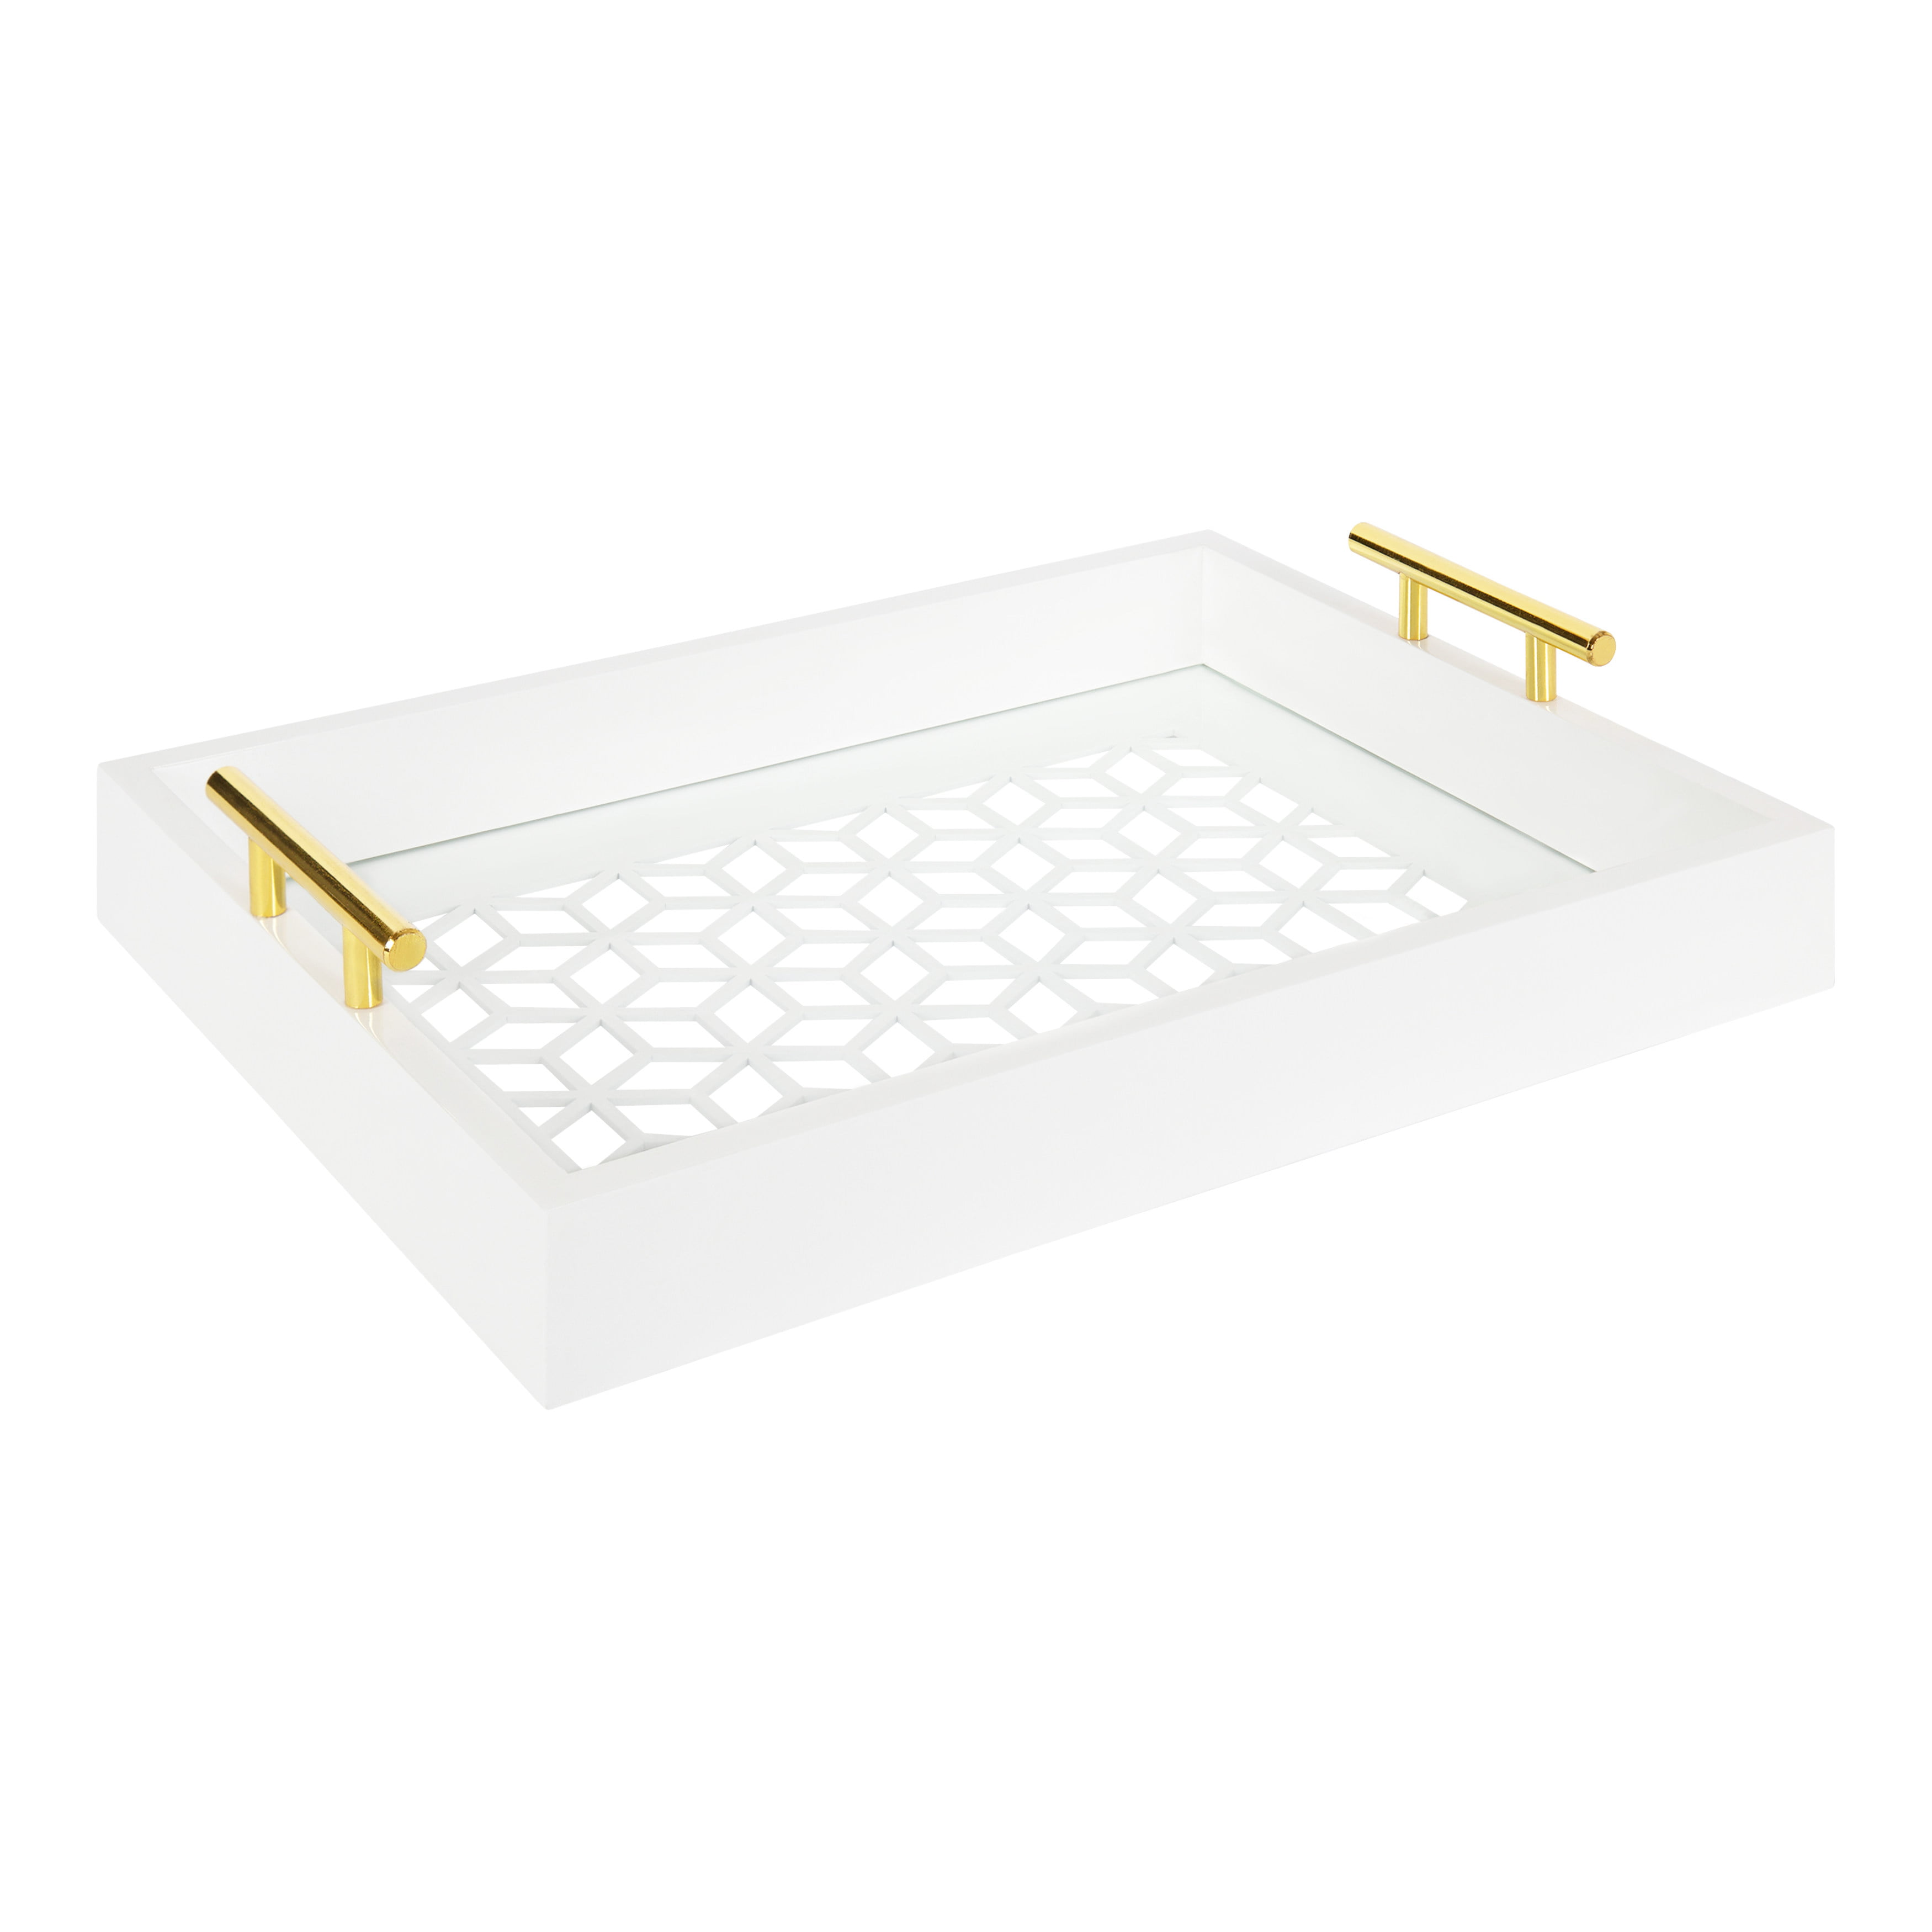 Kate and Laurel Caspen Rectangle Cut Out Pattern Decorative Tray with Gold Metal Handles, 16.5